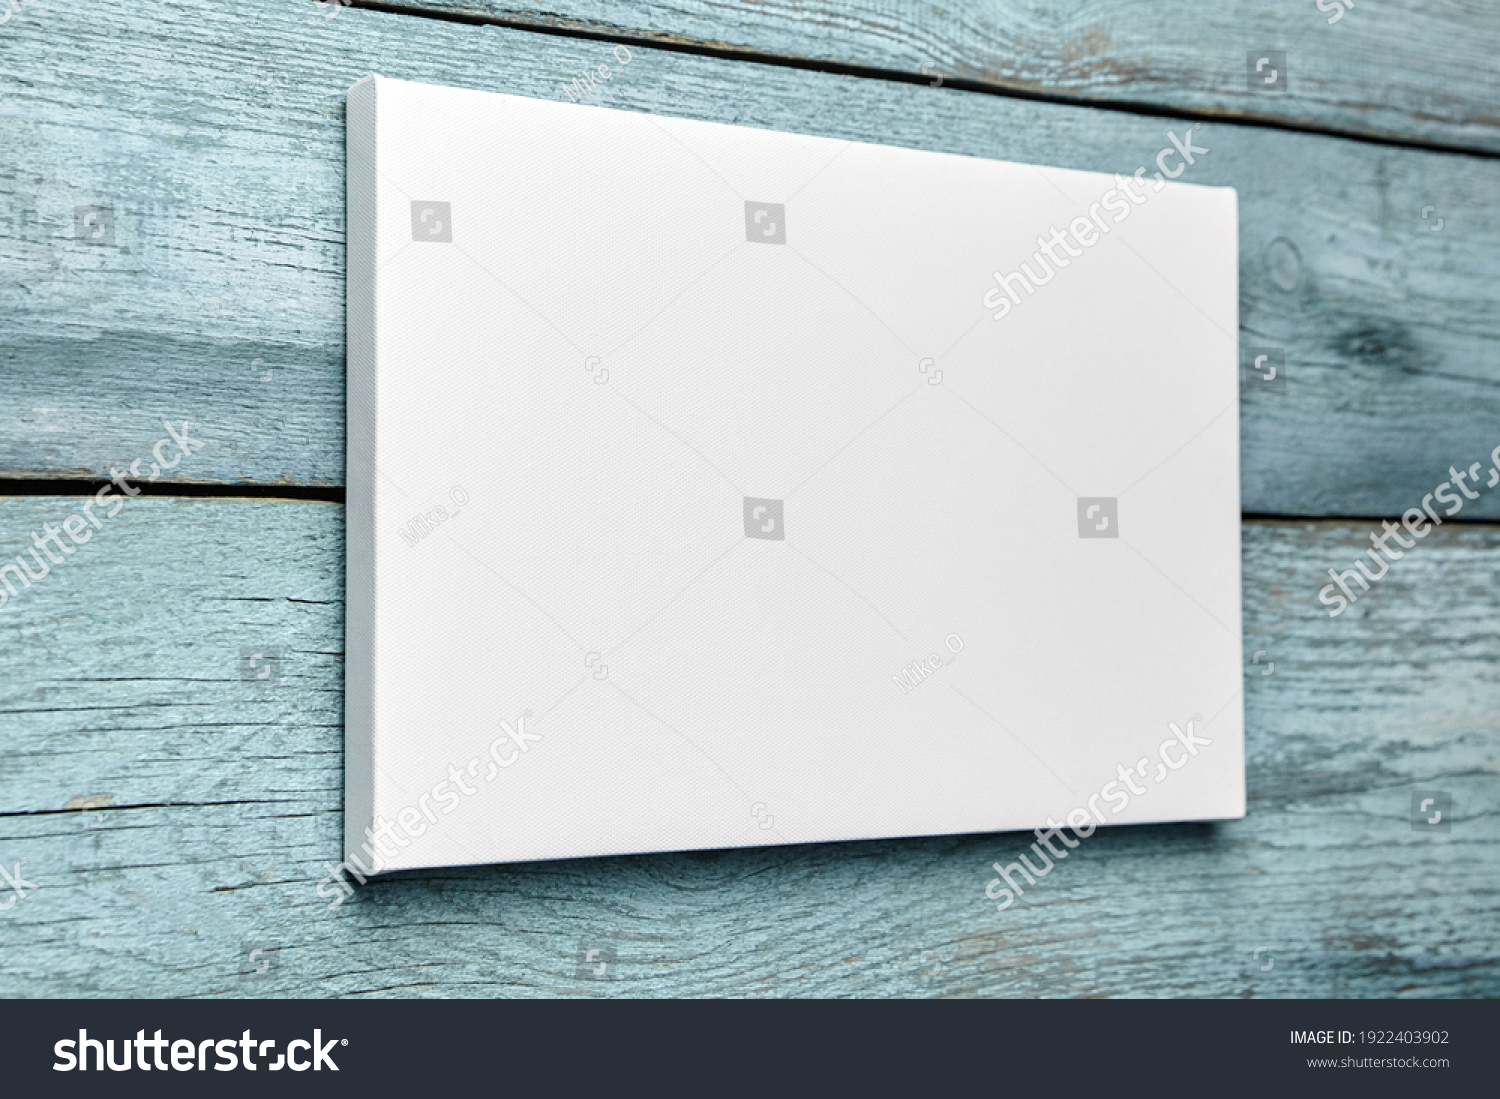 White canvas hanging on light blue wooden wall. Mockup, wall decor, blank canvas stretched on stretcher bar, side view #1922403902